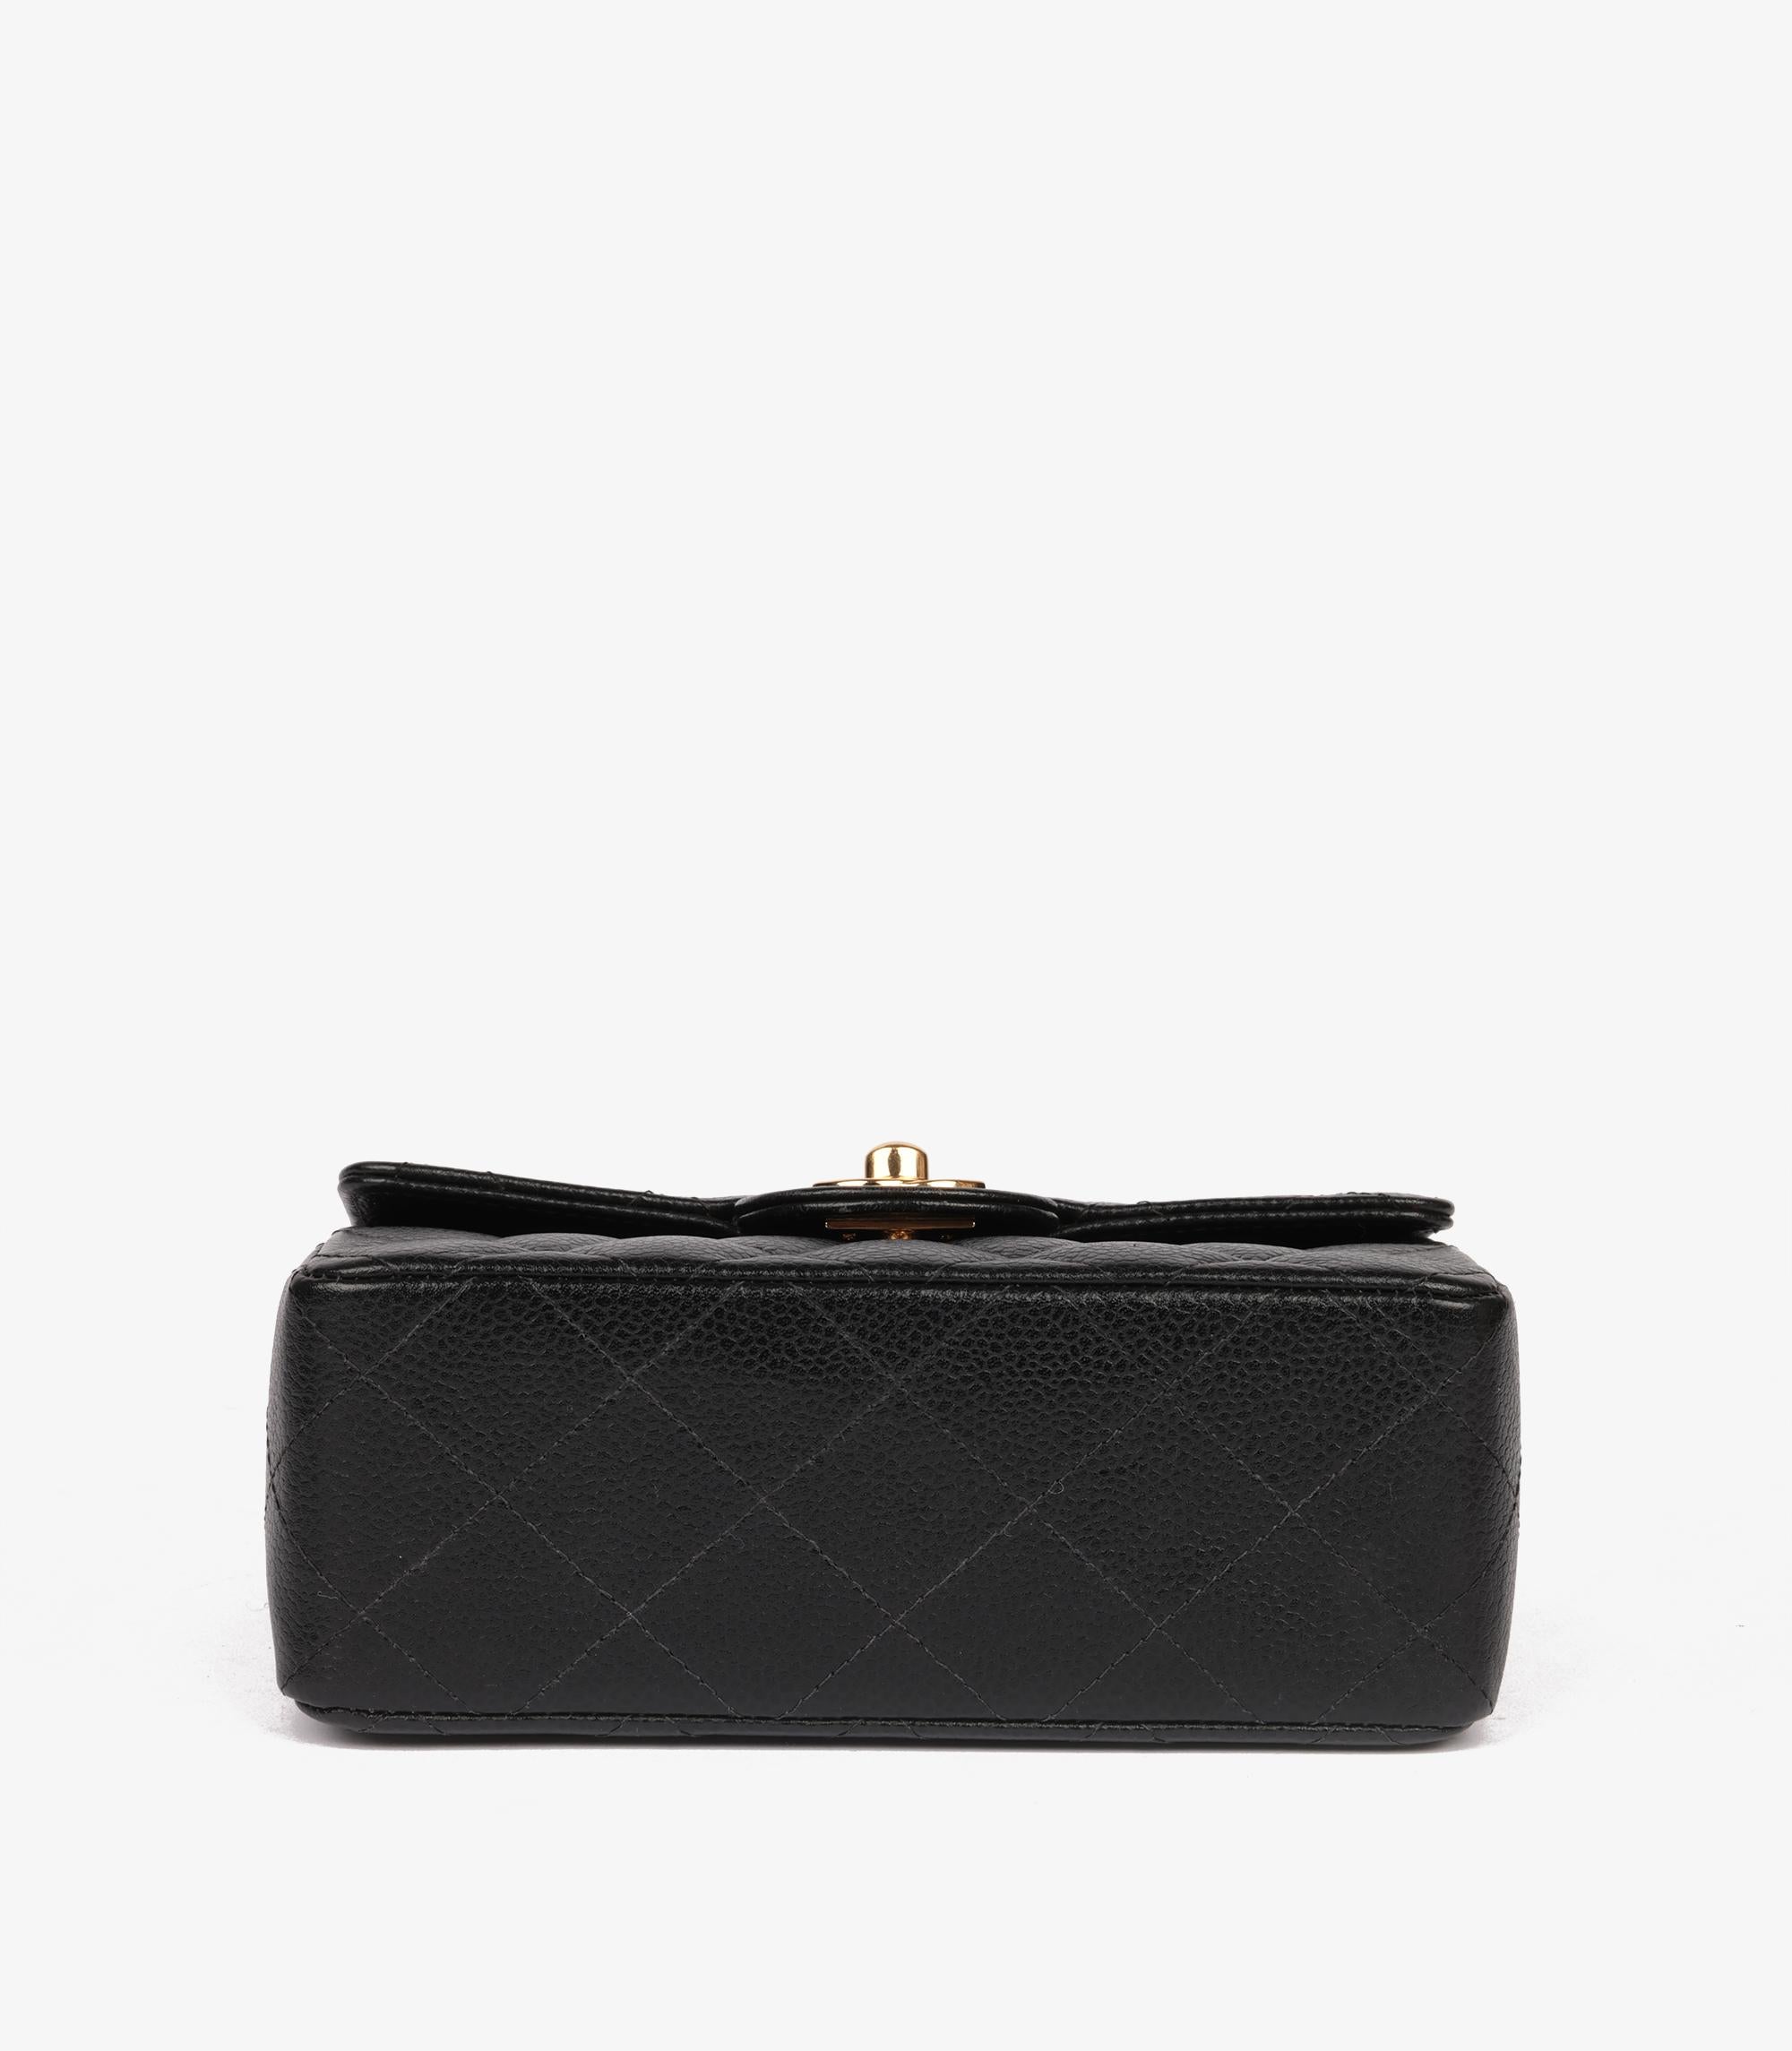 Chanel Black Quilted Caviar Leather Vintage Square Mini Flap Bag 2